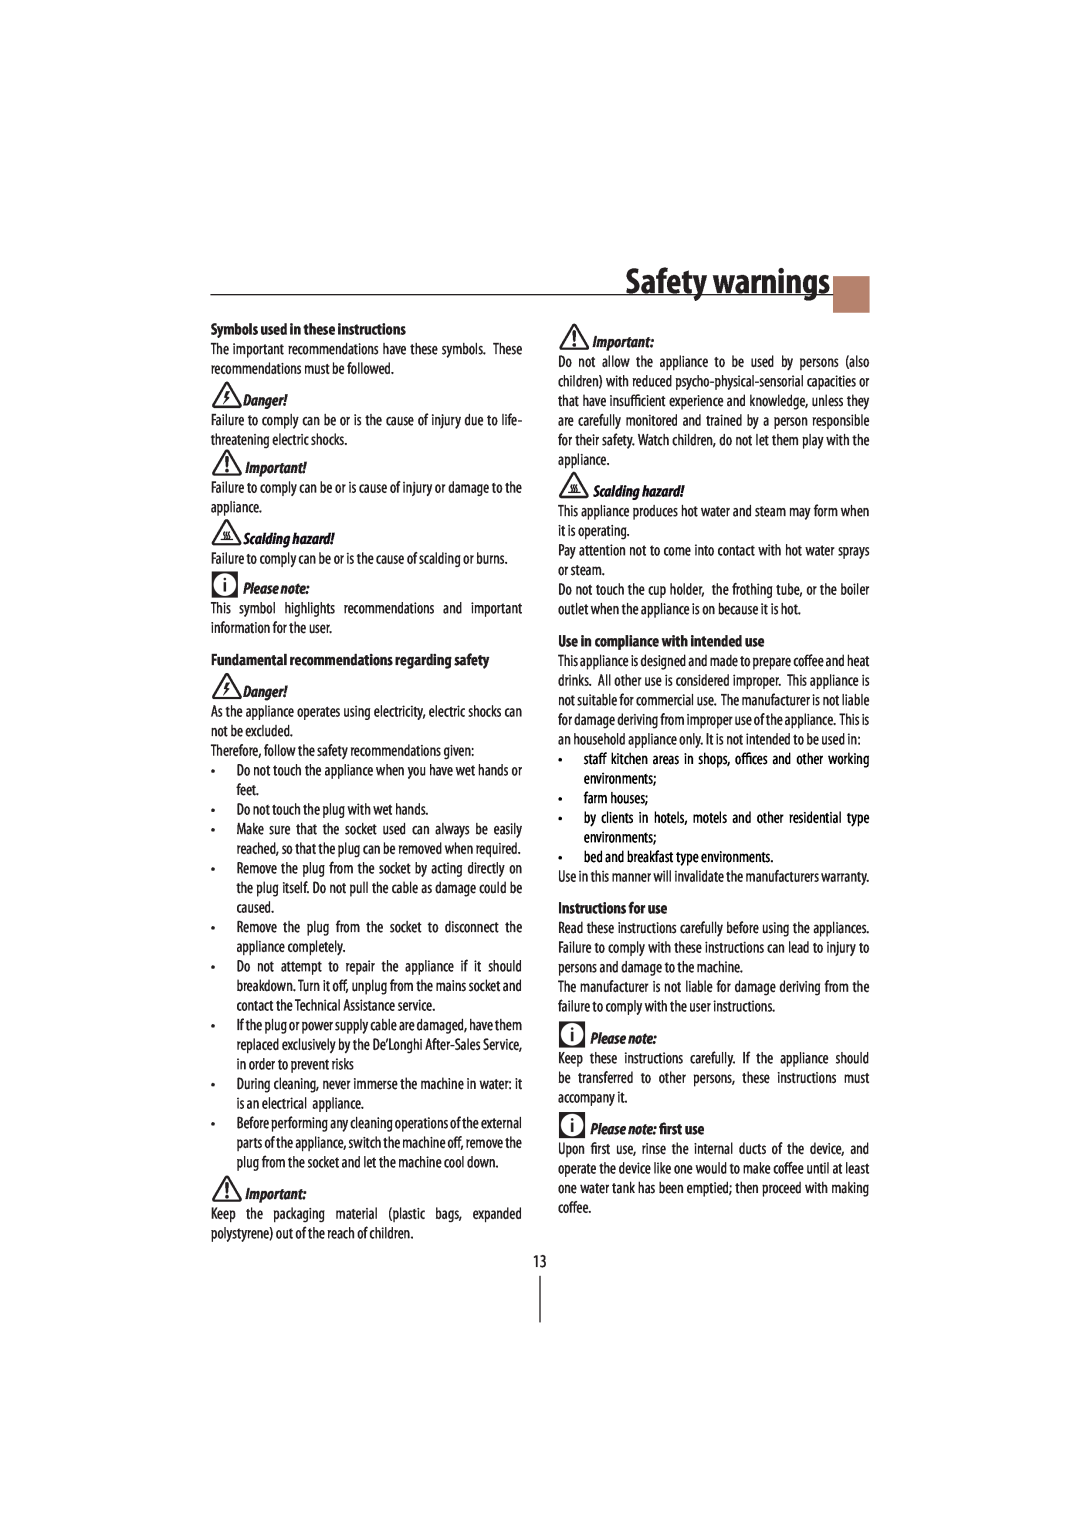 DeLonghi EC250 manual Safety warnings, Symbols used in these instructions, Use in compliance with intended use, Danger 